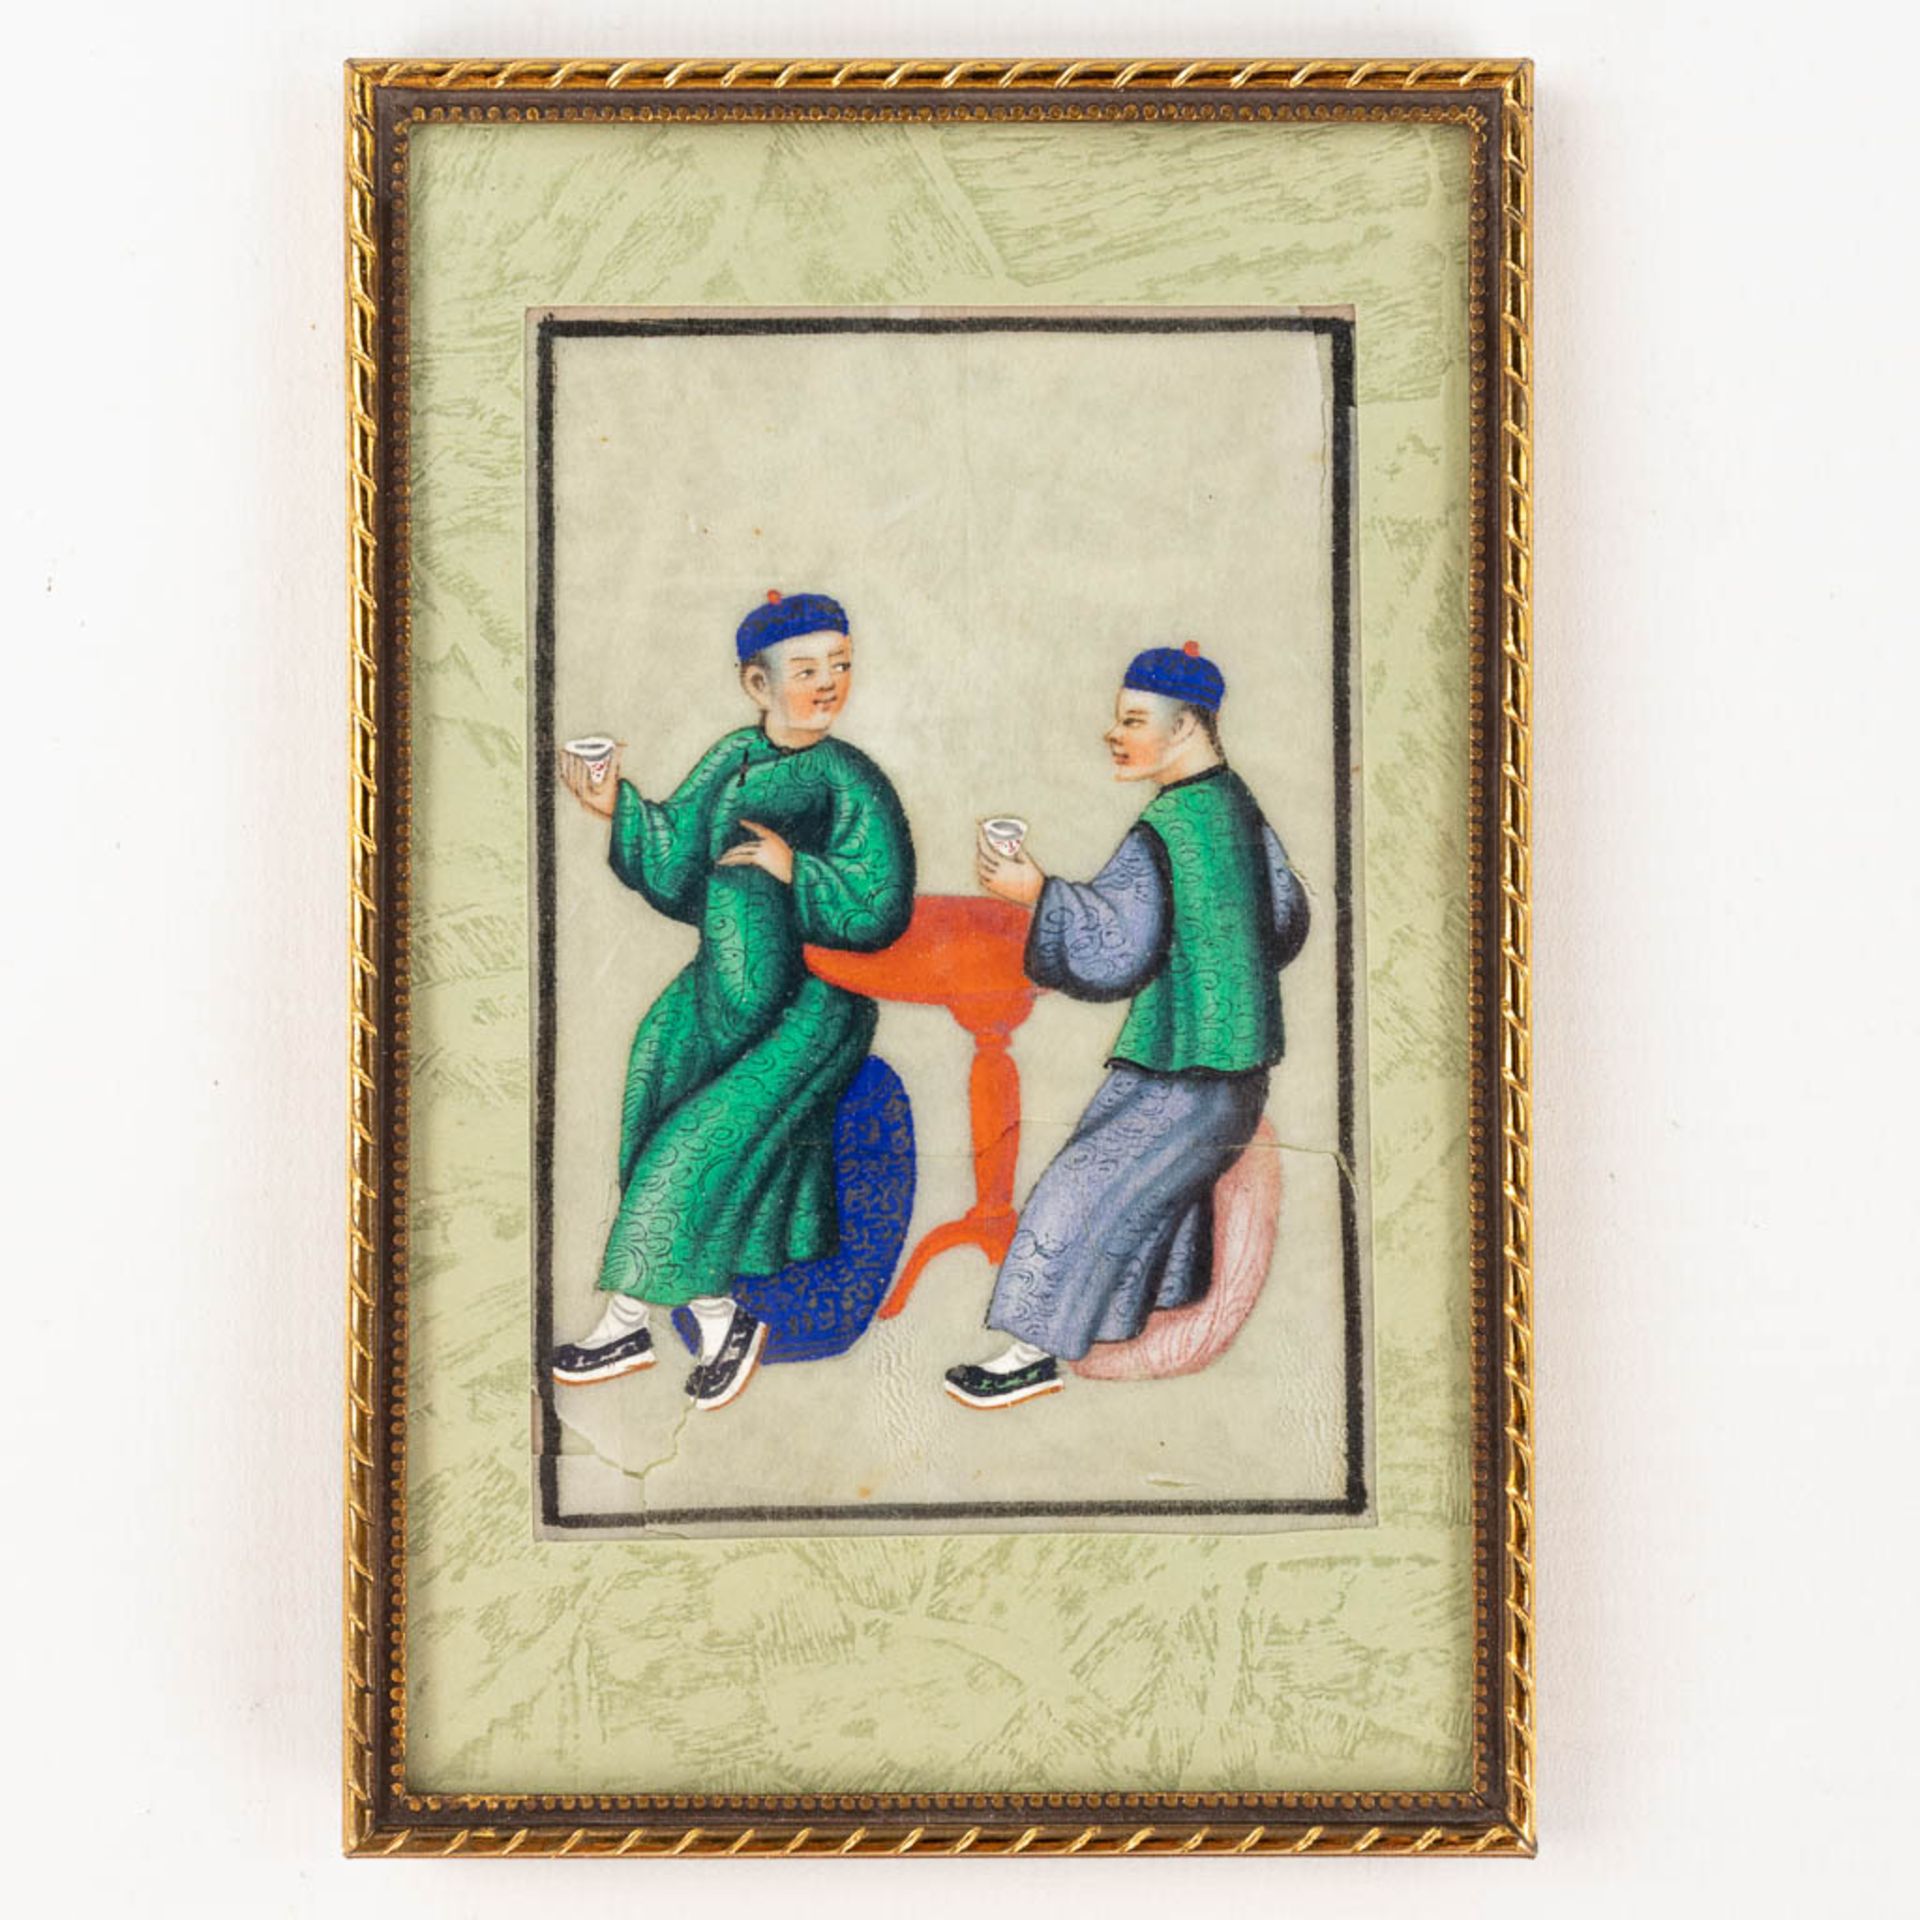 A collection of 8 Chinese watercolour drawings on paper. (W: 7 x H: 10 cm) - Image 7 of 12